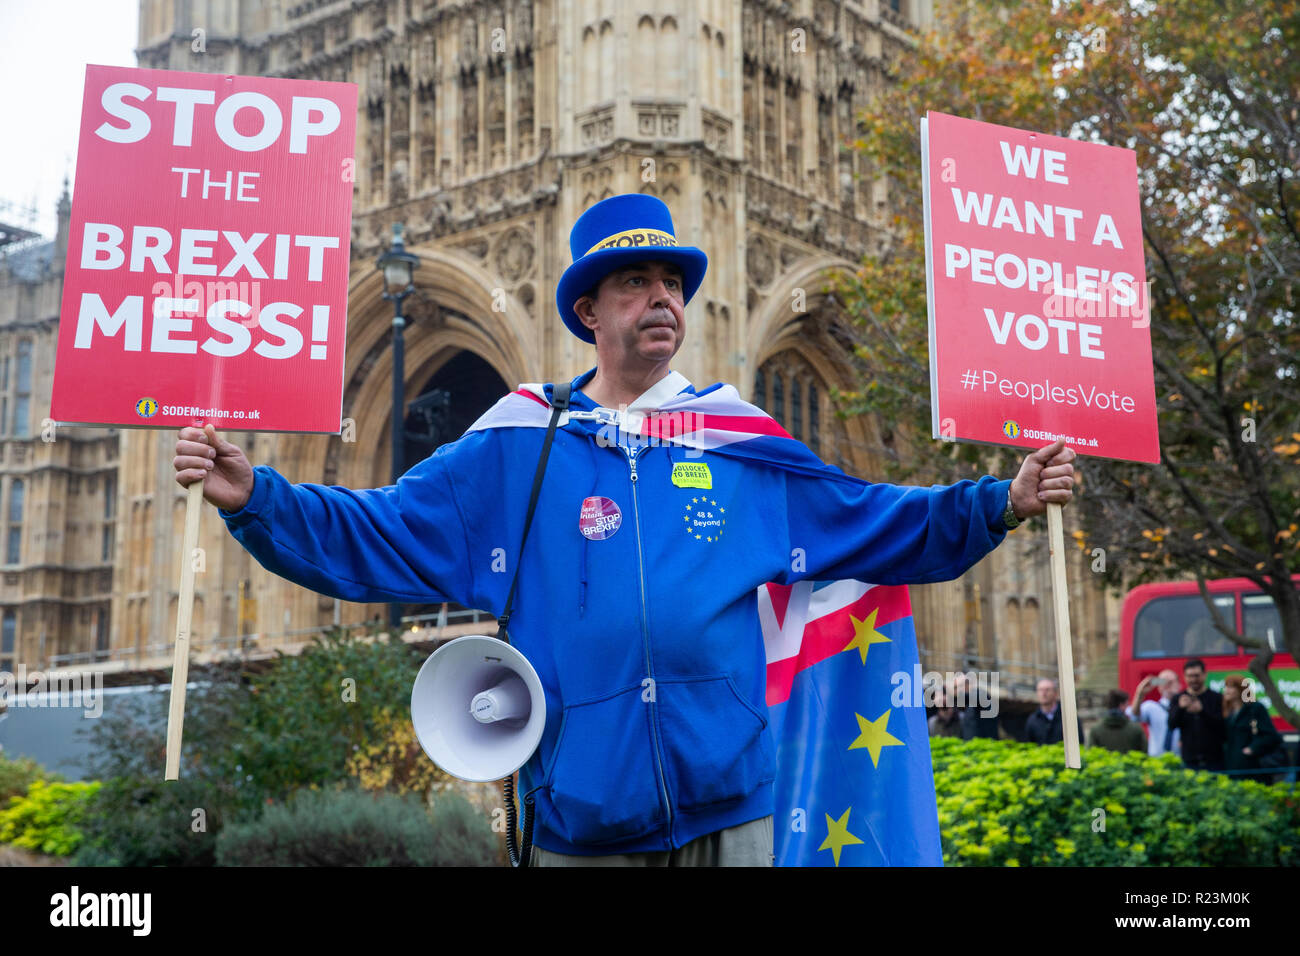 Anti Brexit supporters outside Parliament campaigning to stop Brexit. They would like to remain in the EU. Stock Photo